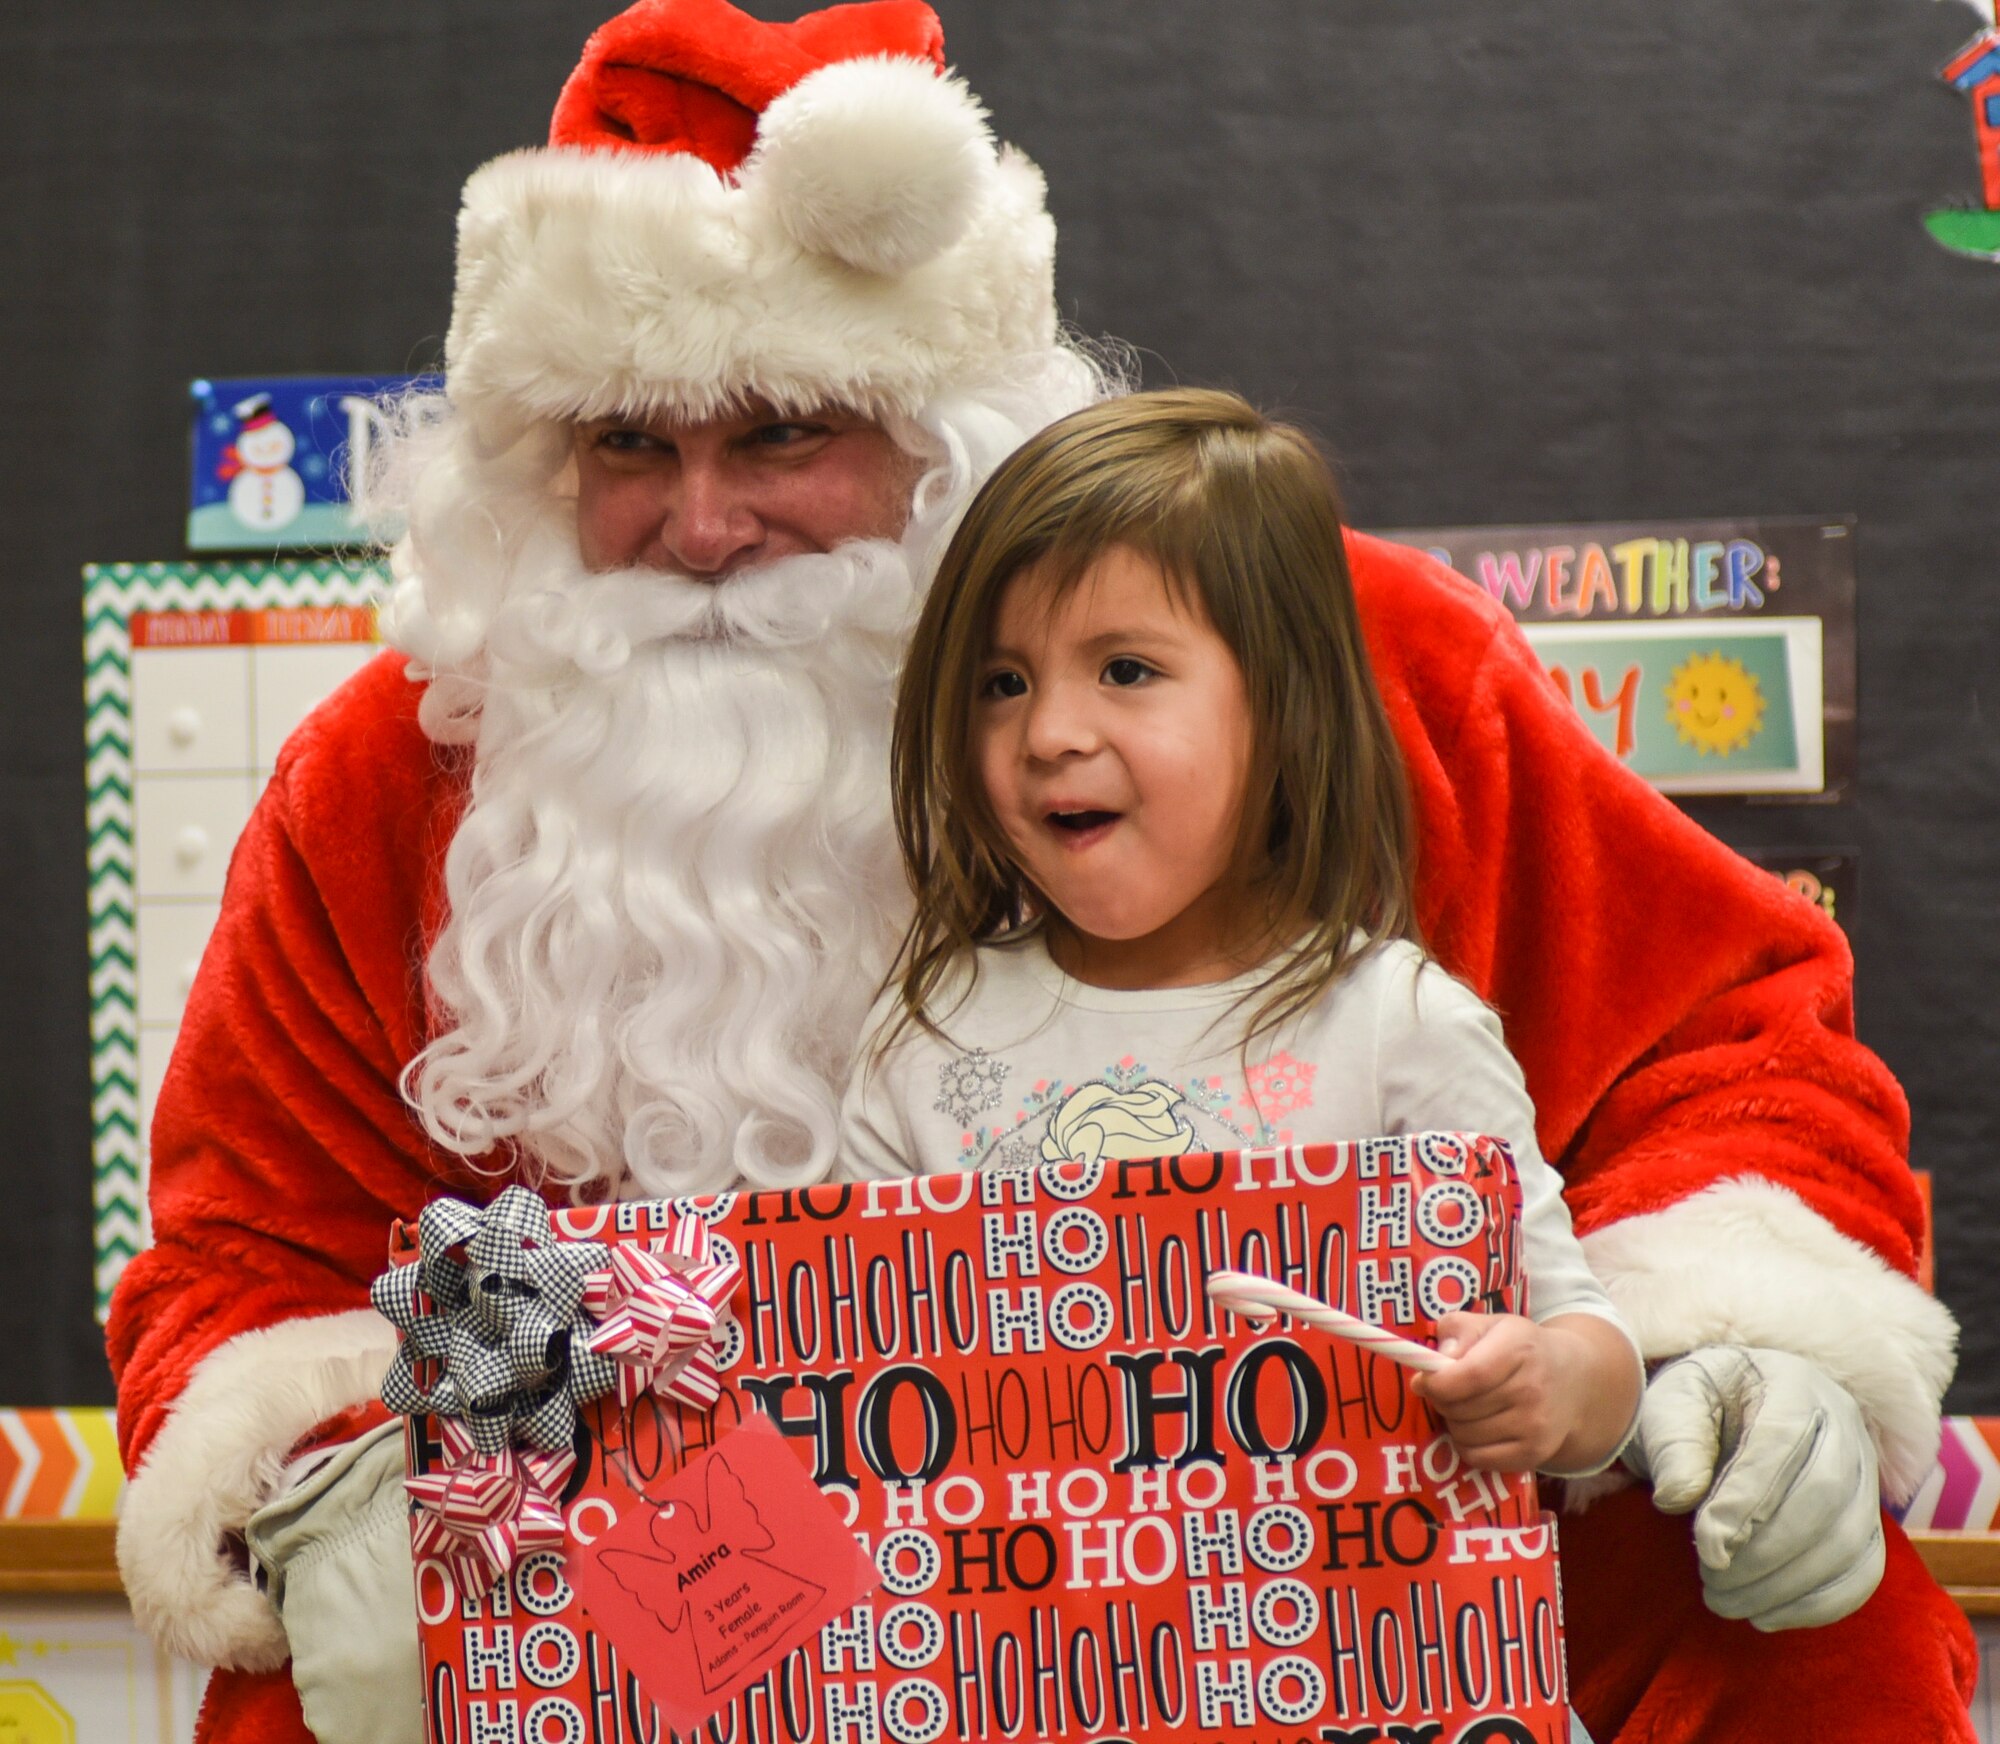 A child receives a present from Santa inside the Youth & Family Services center in Rapid City, S.D., Dec. 14, 2016. More than 250 children received a gift as part of this year’s Angel Tree program in Rapid City. (U.S. Air Force photo by Airman 1st Class Randahl J. Jenson)